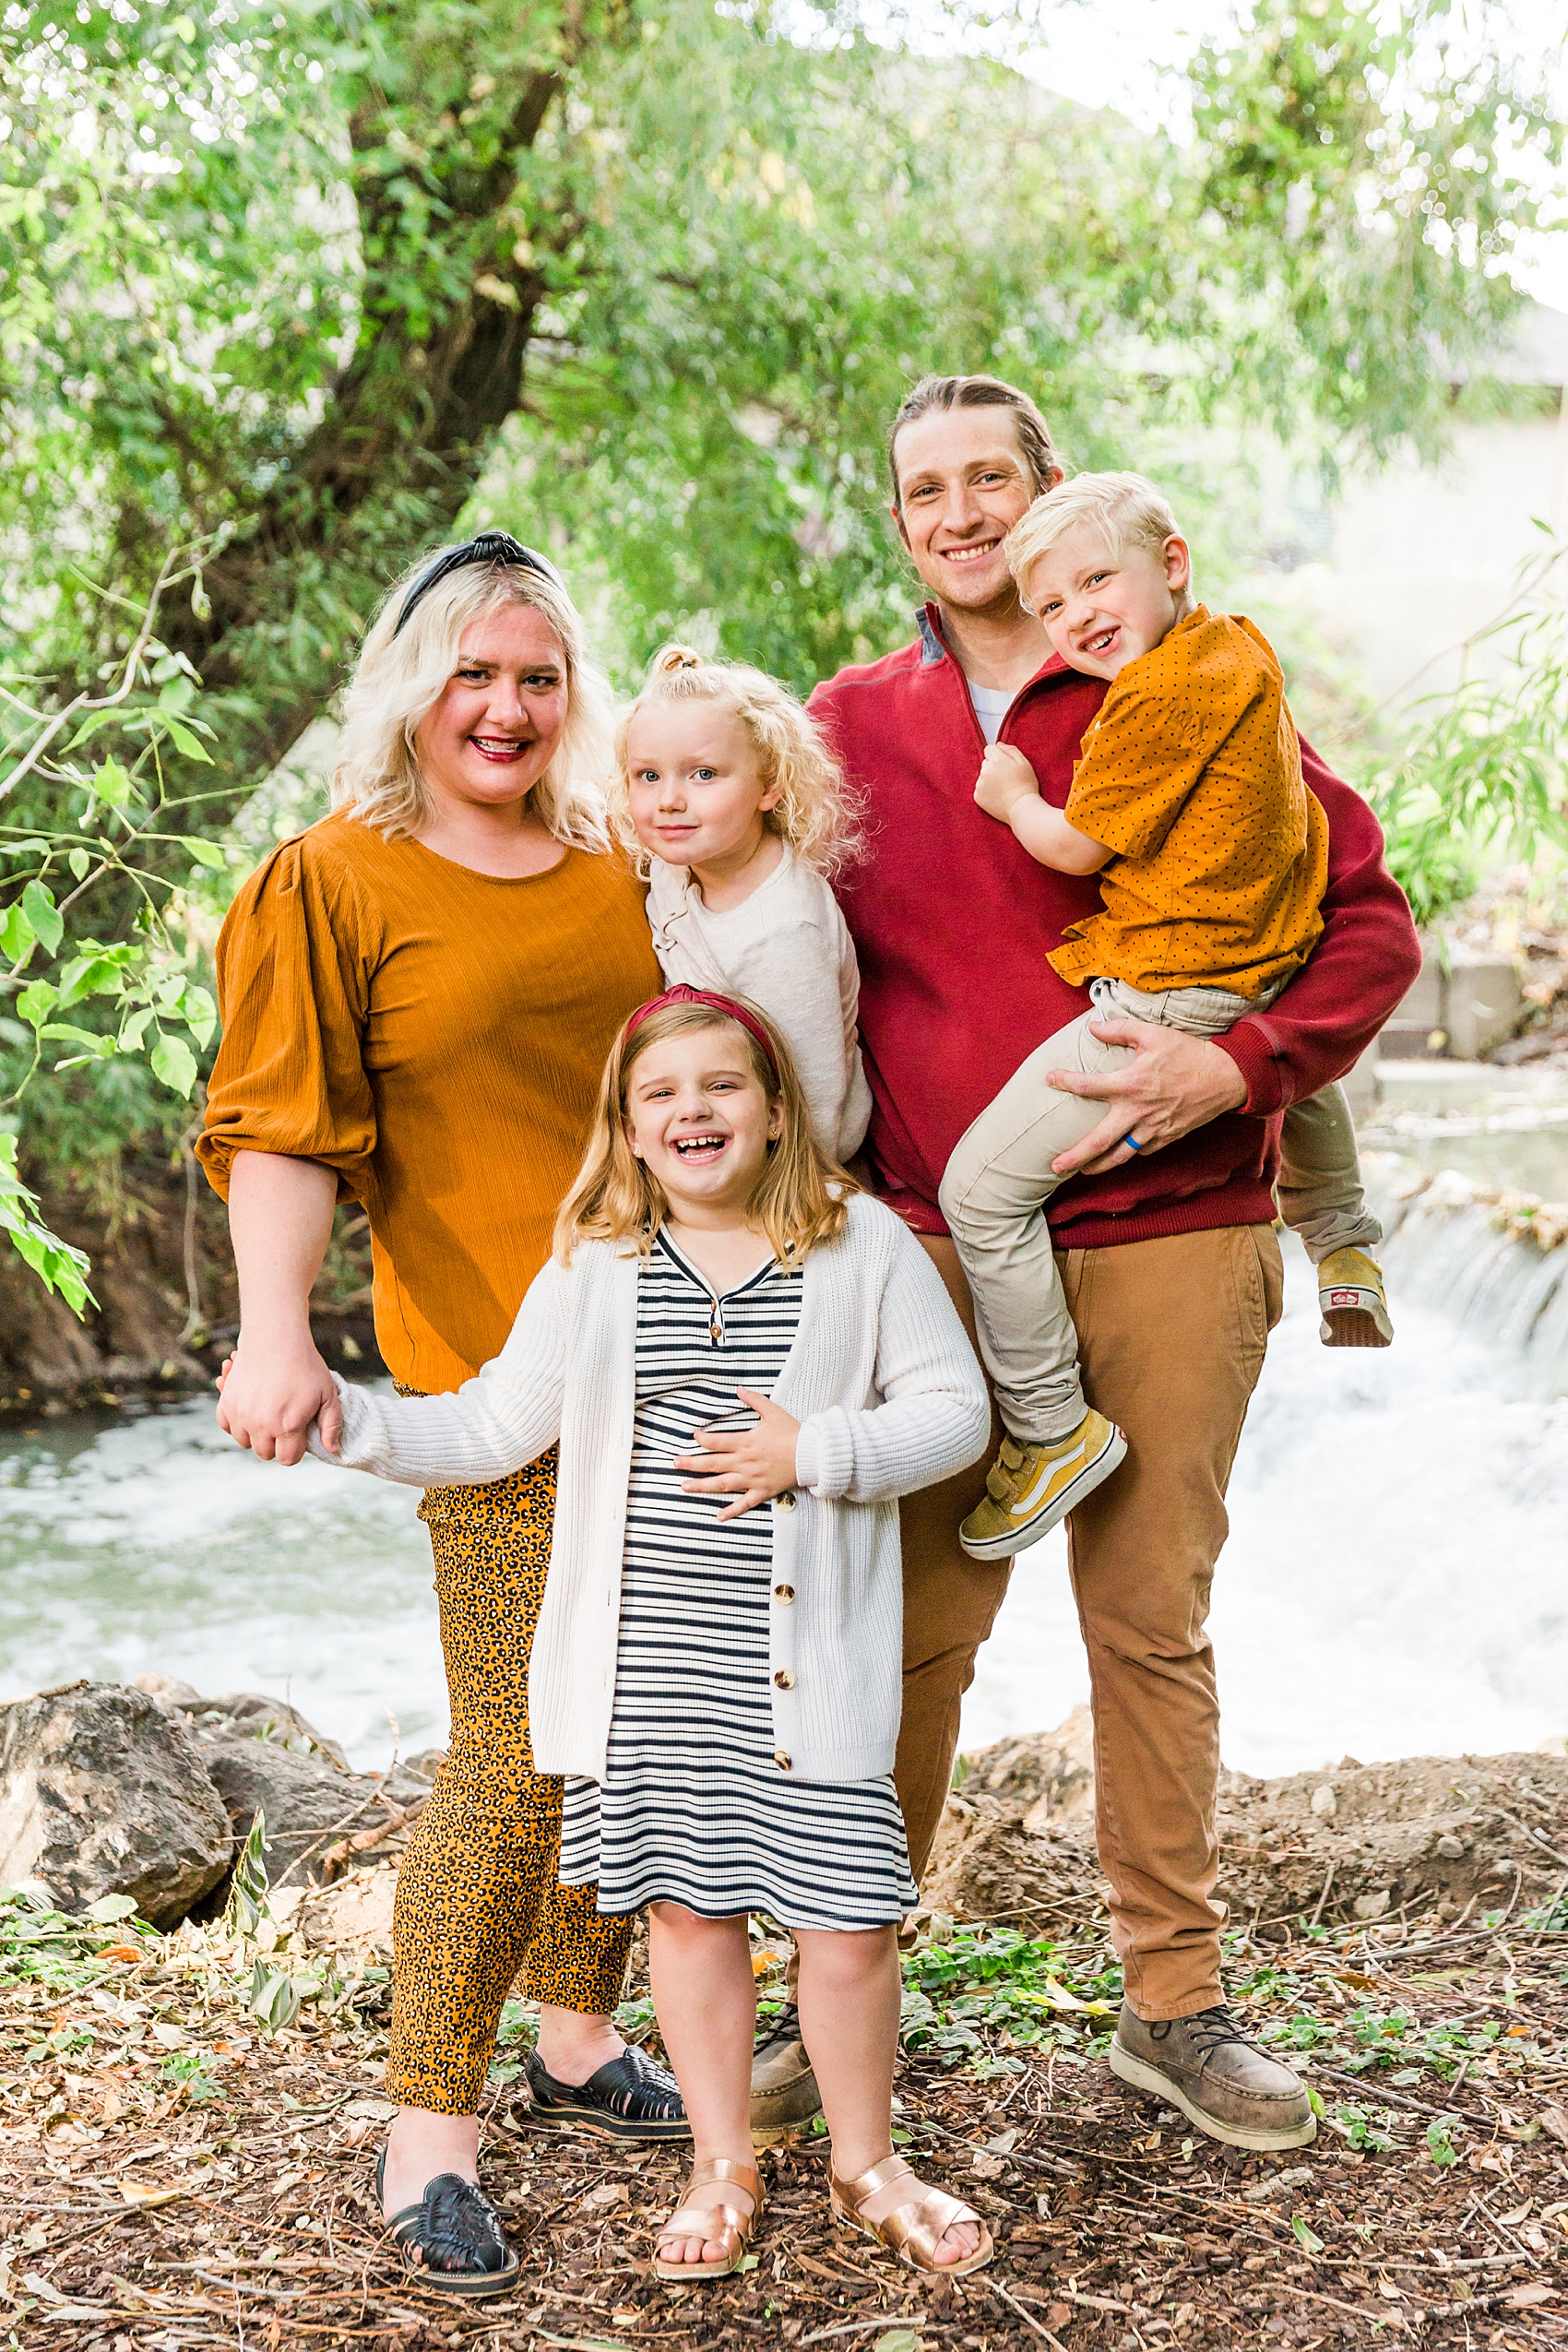 Leah Hope Photography | Salt Lake City Utah Family Photos | Green Nature Ivy Trees | Family Pictures | What to Wear | Family Posing Poses | Scottsdale Photographer | Family Child Photographer | Outfits and Styling Ideas | Family Photography | Abi Ayres Family | Playful Candid Pictures